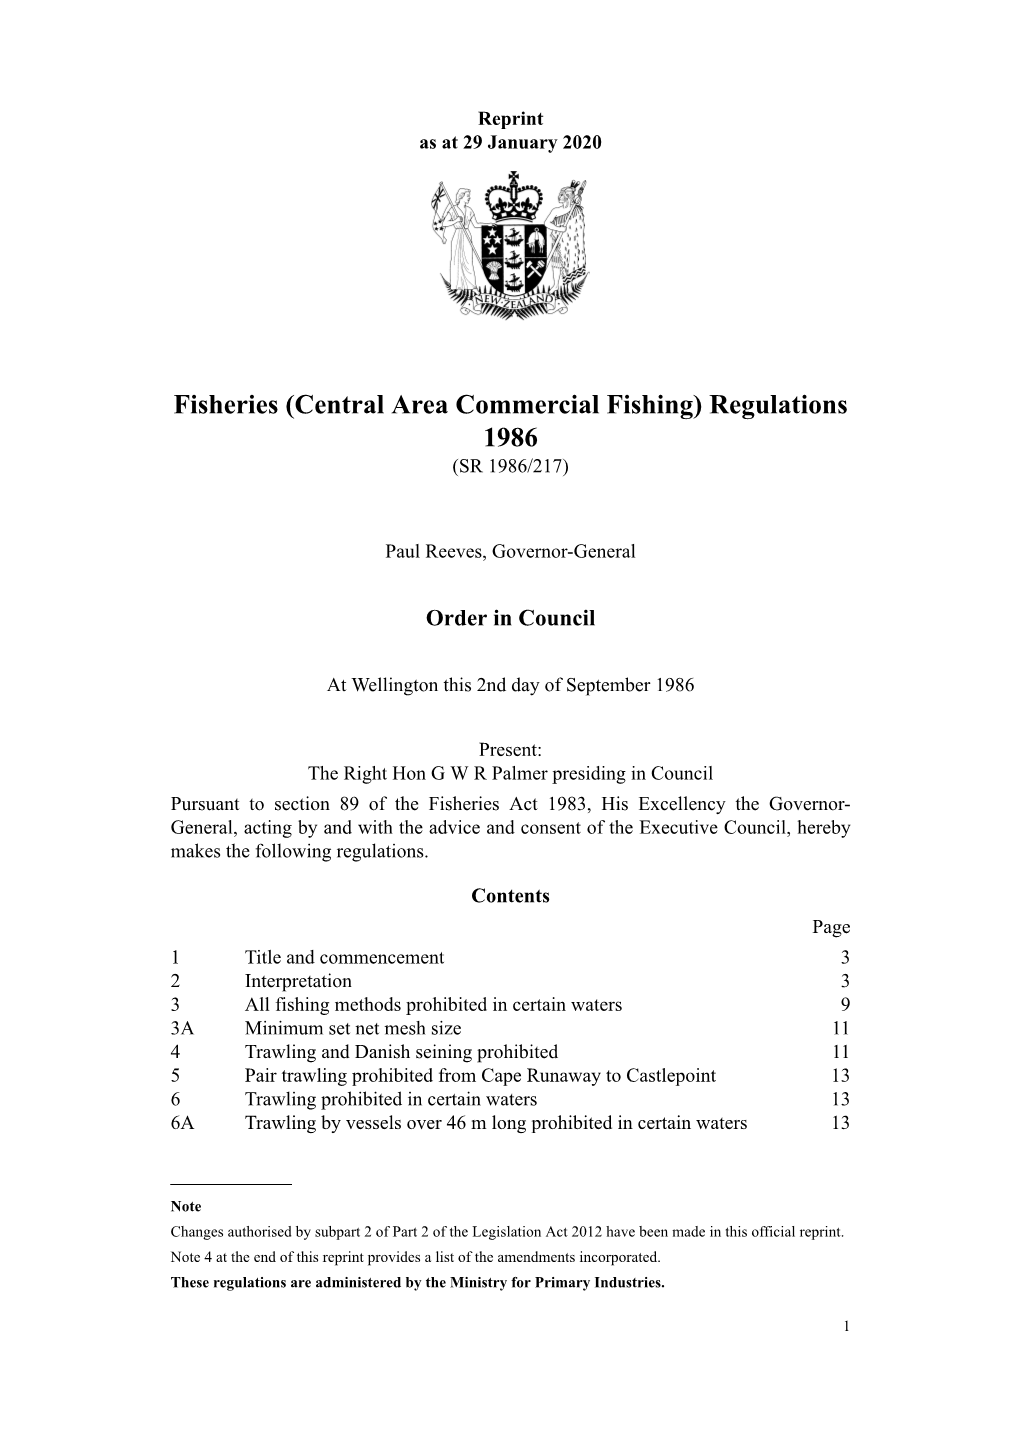 Fisheries (Central Area Commercial Fishing) Regulations 1986 (SR 1986/217)